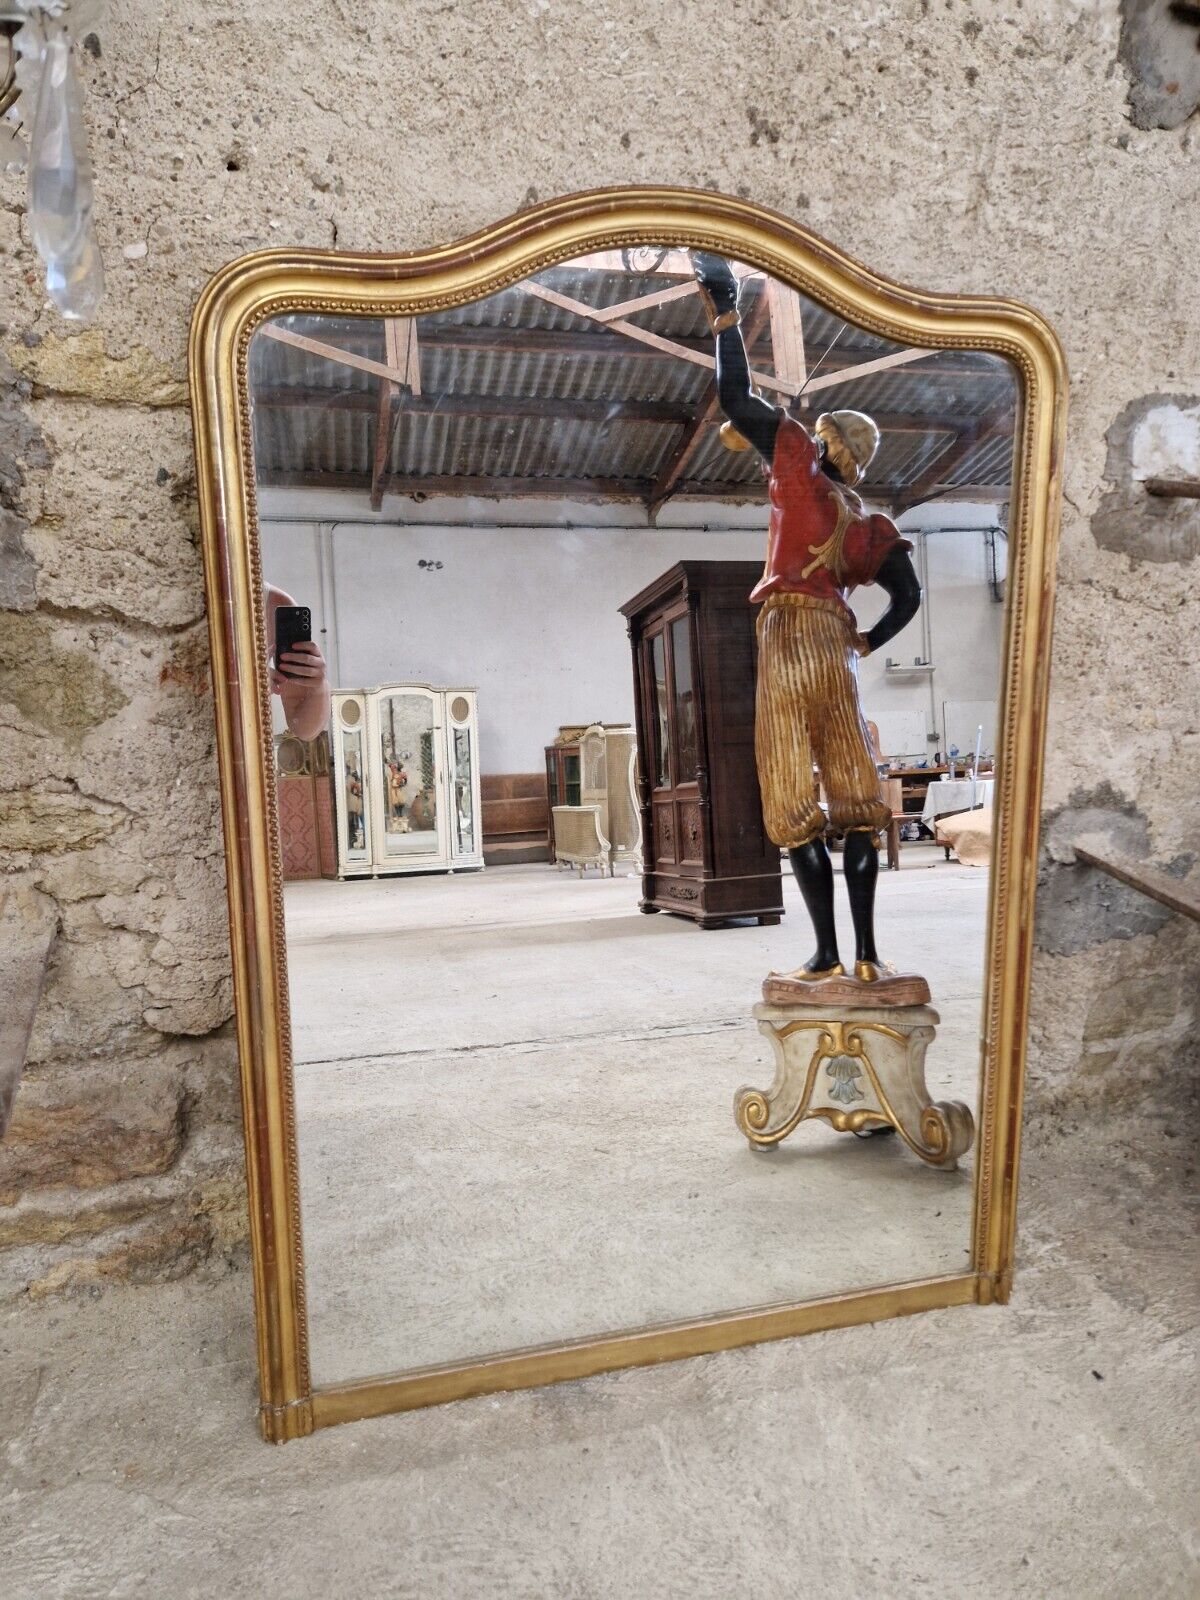 Fabulous Louis XV Style Large Mirror 


Gilt Surround

Decorated with Pearls 

Wood Frame

Wood Panel Back

Some re touching up of the gilt frame, missing pieces of gilded composite - there are some imperfections due to age and use


Circa